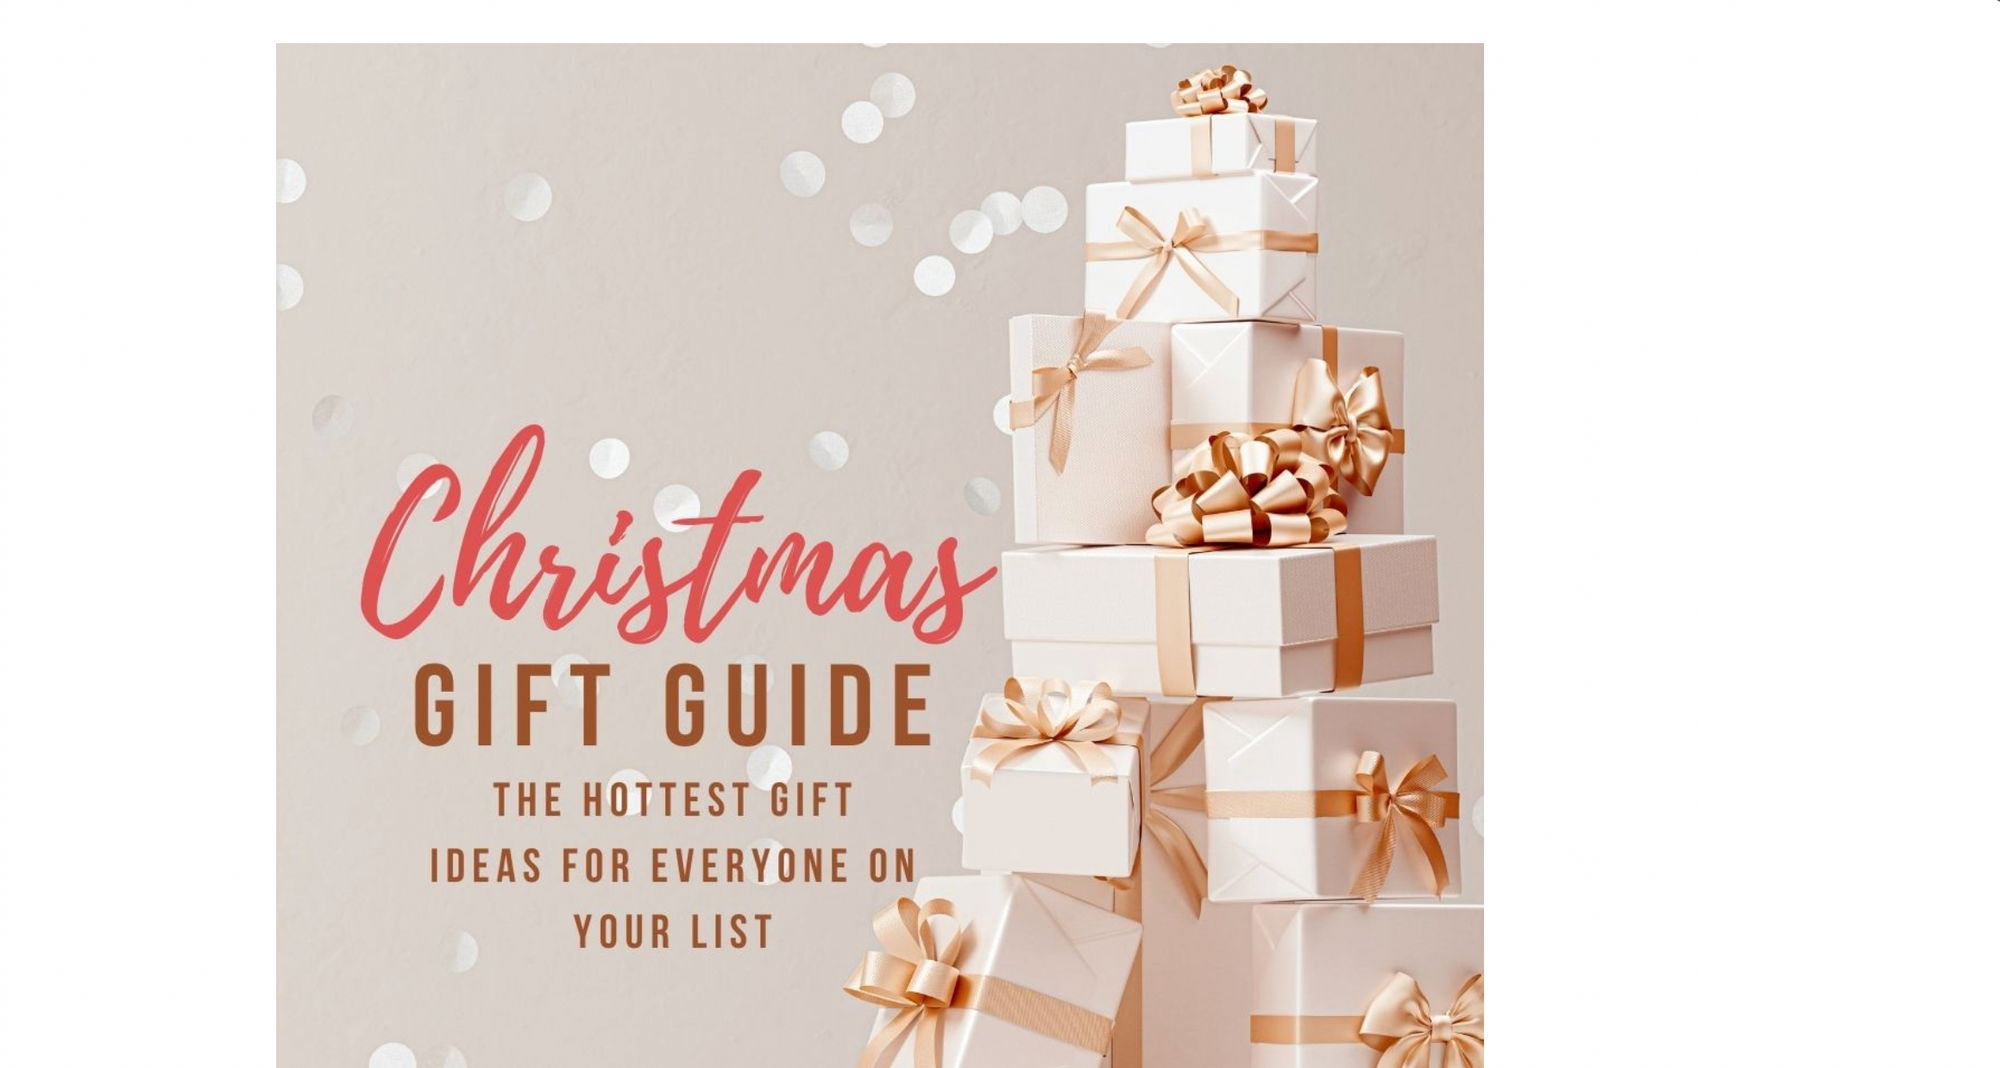 Cam 360 featured in Outnumbered 3 to 1 Holiday Gift Guide